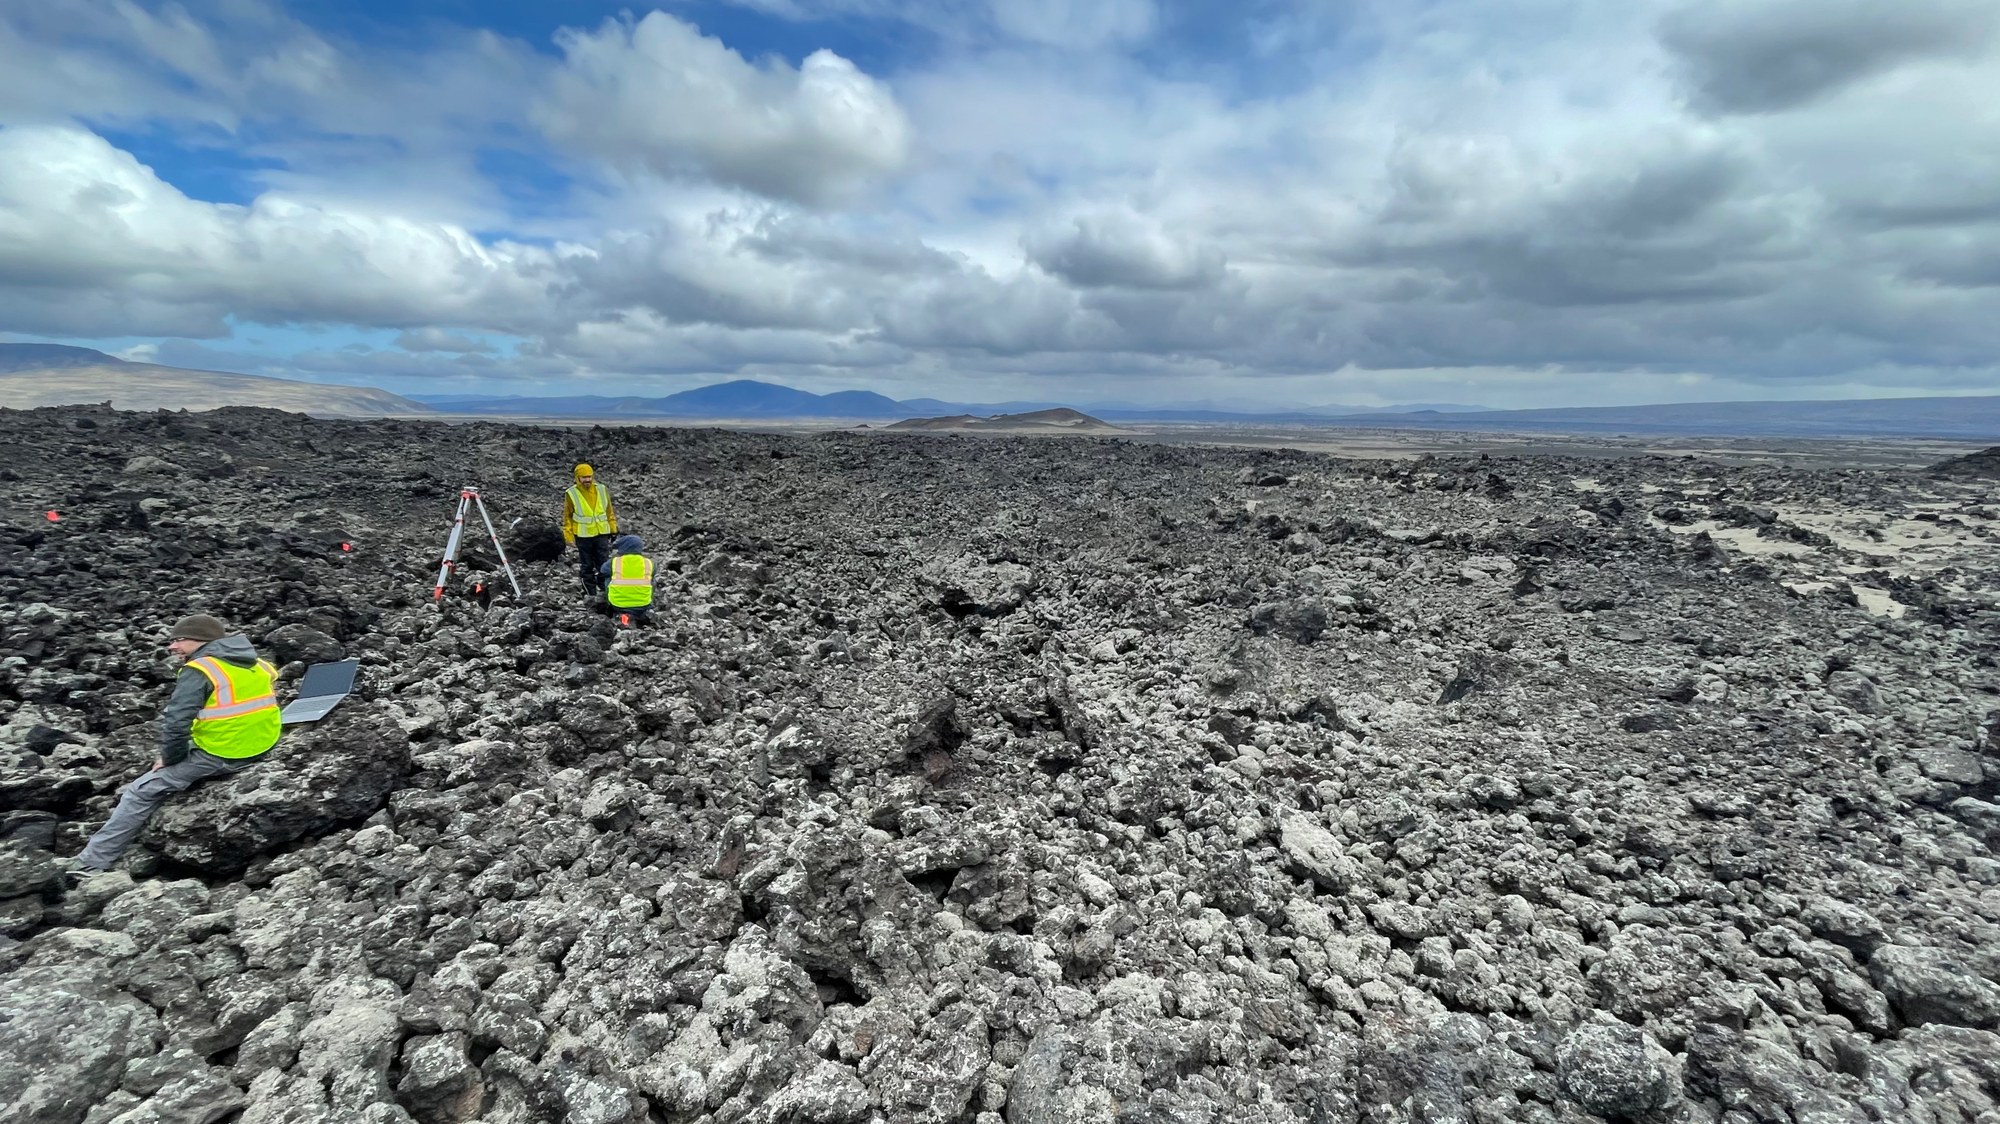 Switching the Laboratory for the harsh volcanic environment on Iceland